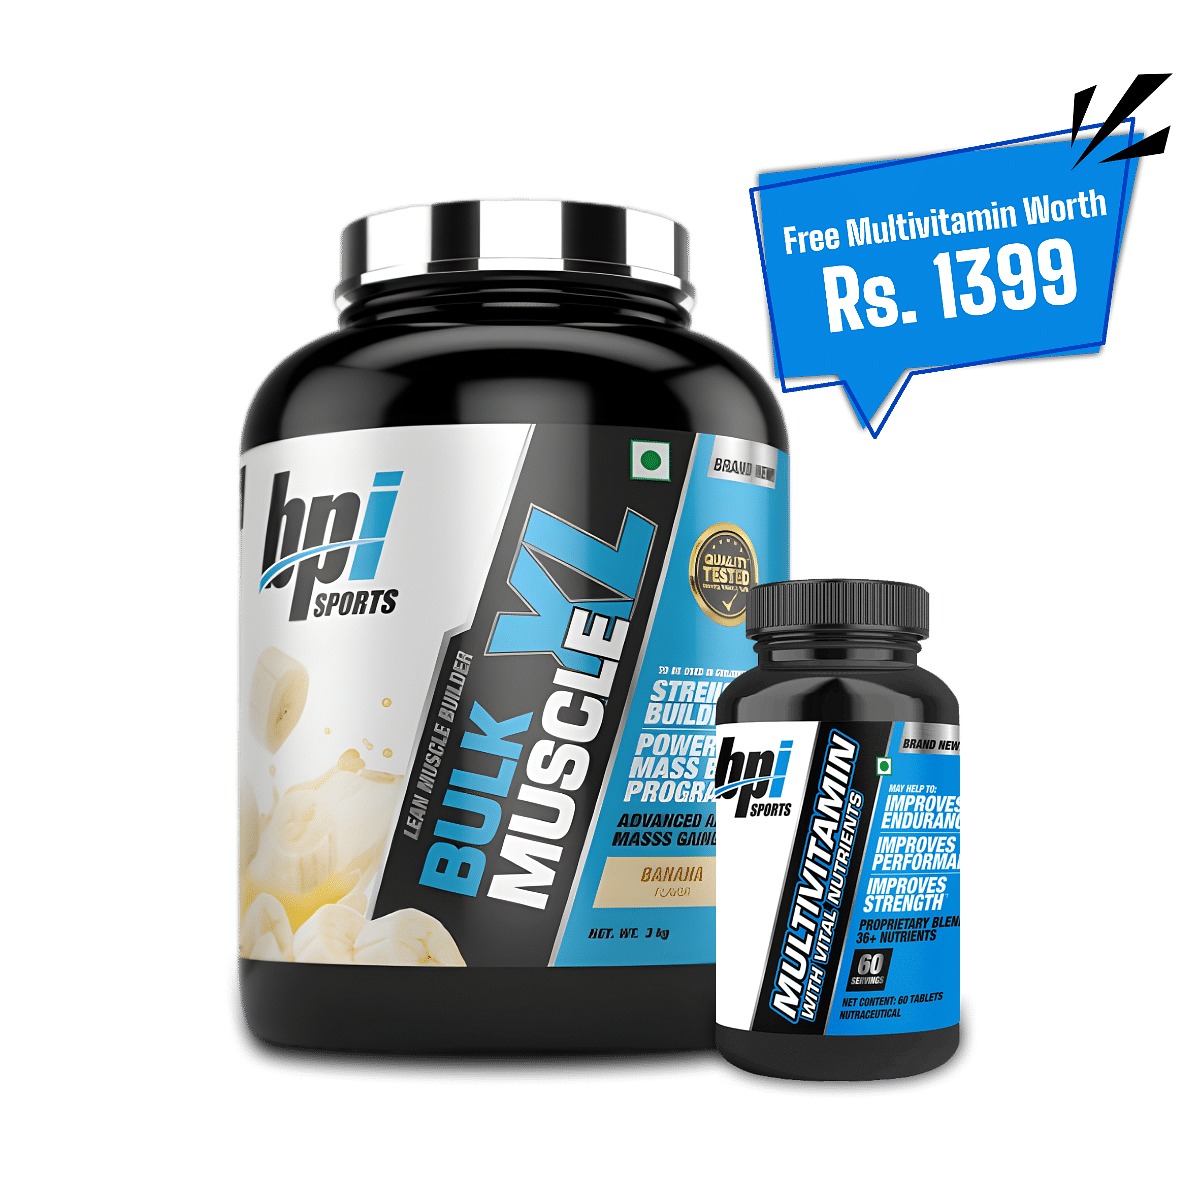 Buy Best Mass Gainer and Weight Gainer at Lowest Prices Online in India